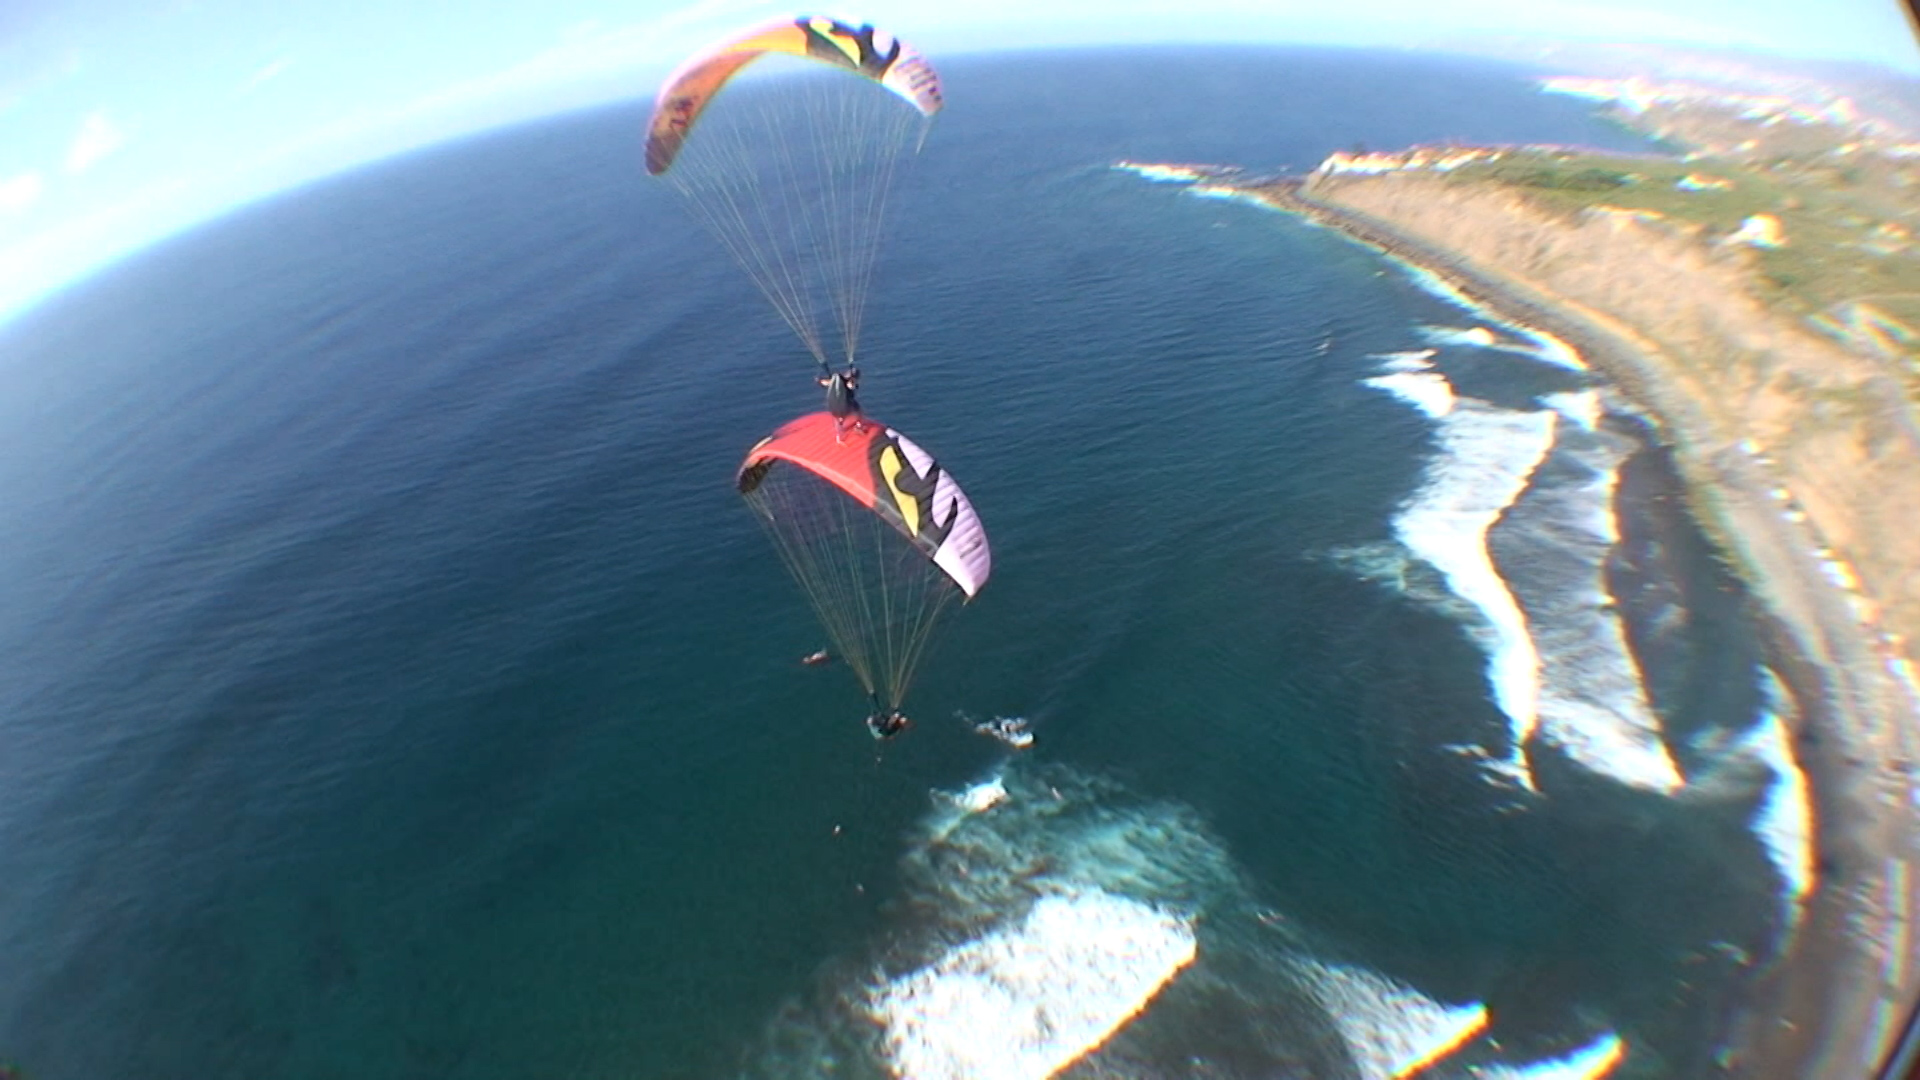 VIDEO: Extreme Paragliding with the Acro Twins – Garage